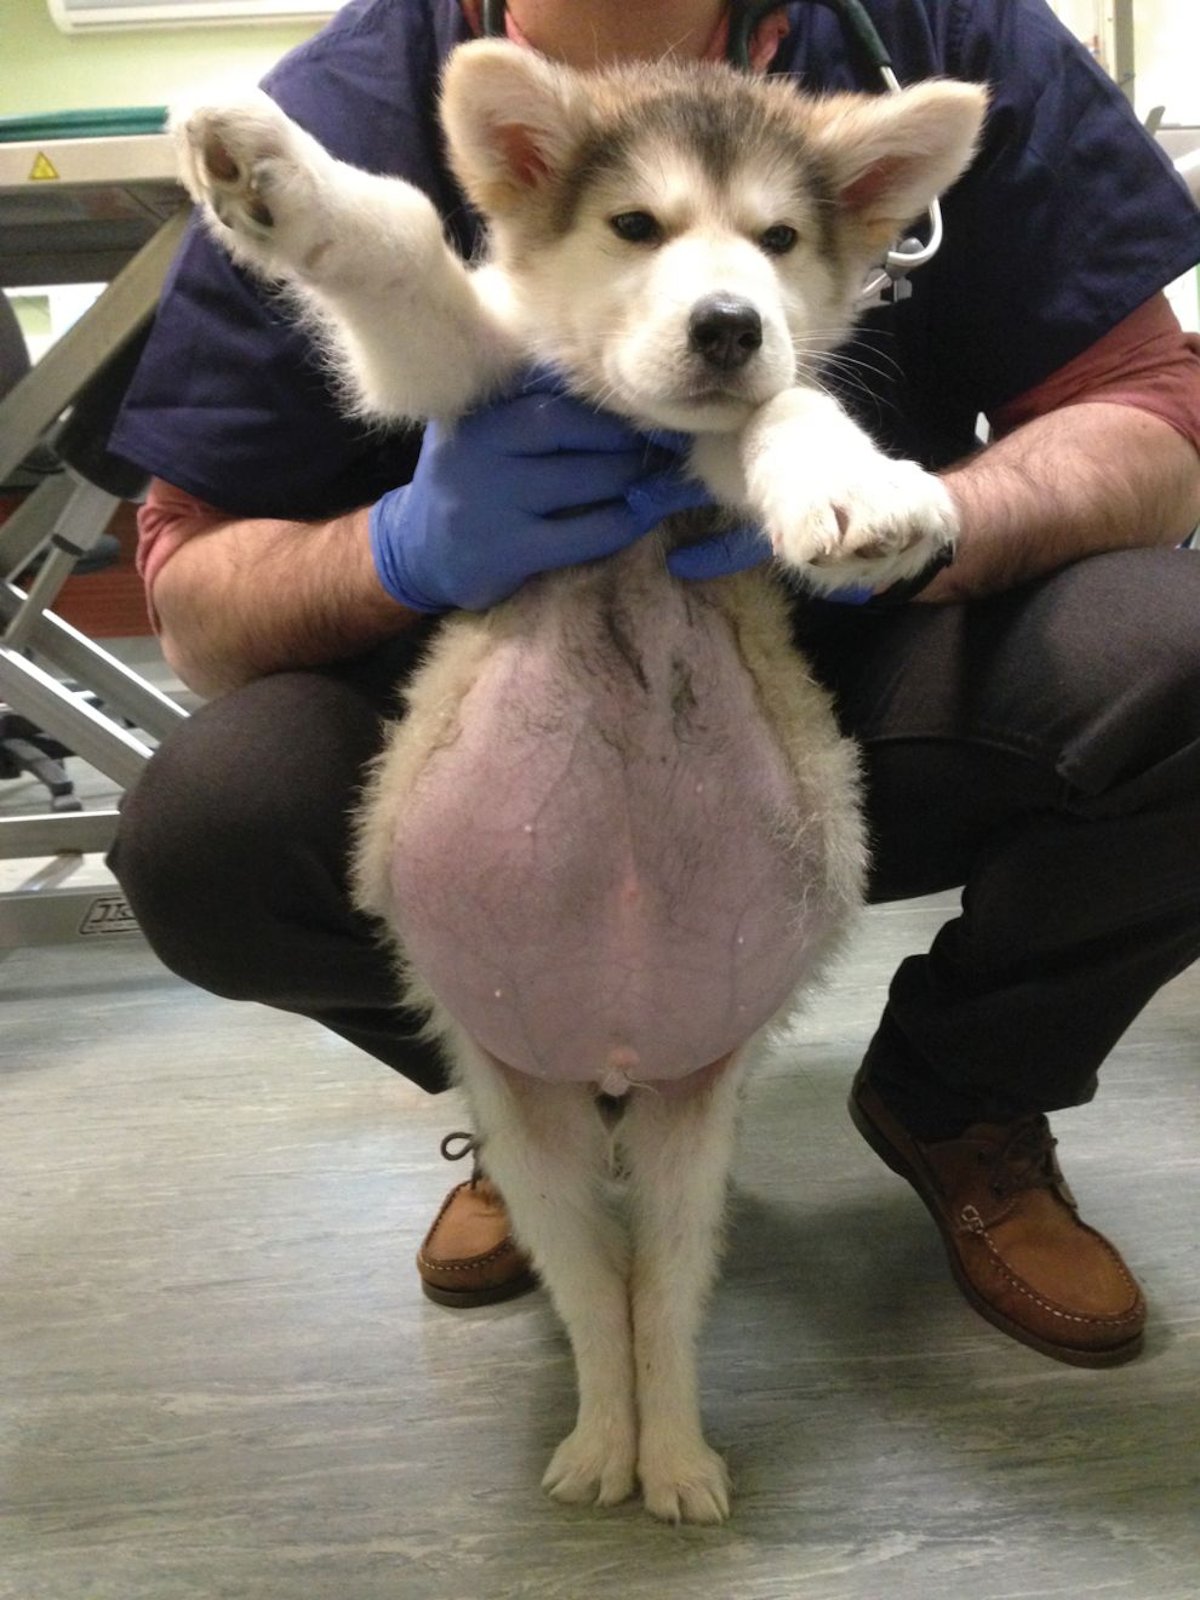 A 3-month-old puppy with ascites due to portal vein hypoplasia and portal hypertension.